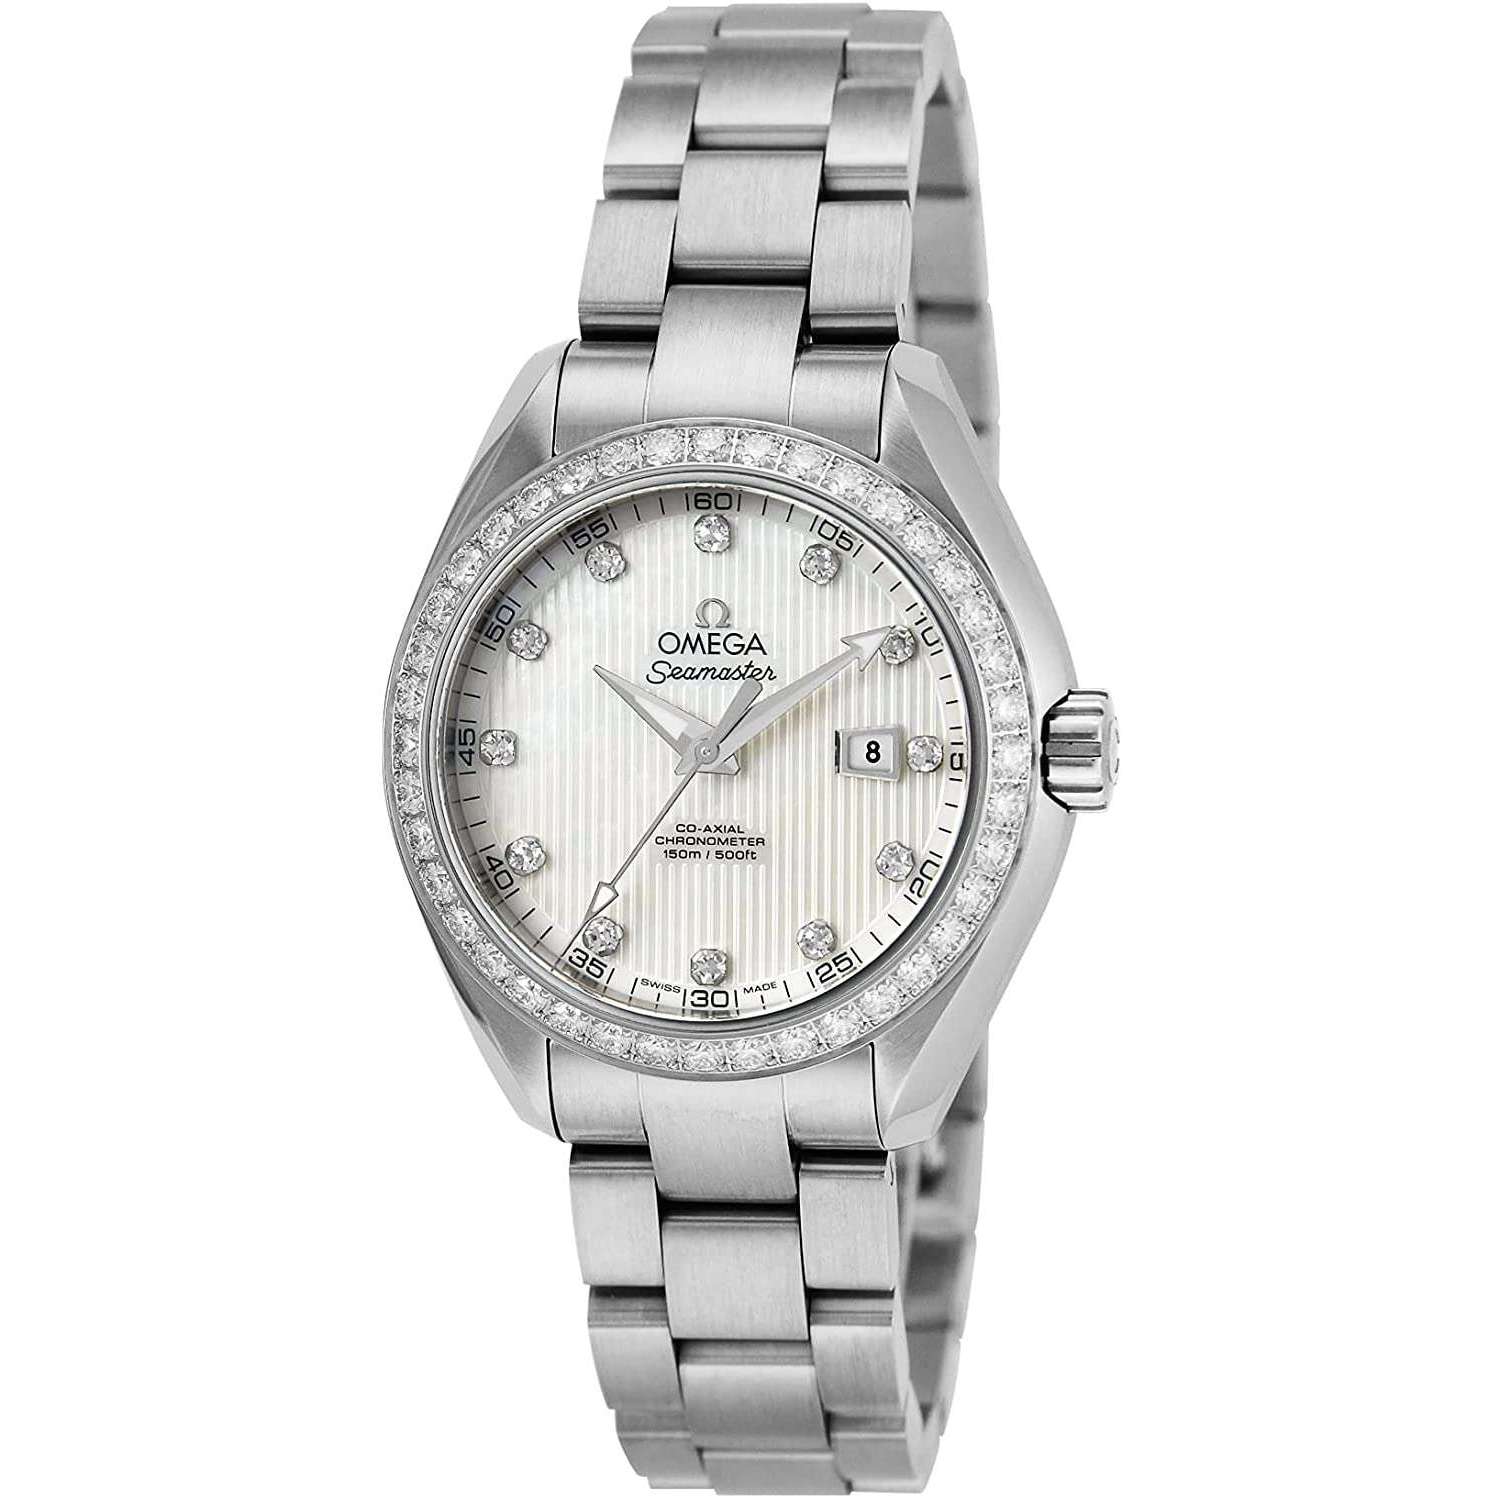 ROOK JAPAN:OMEGA SEAMASTER CO-AXIAL CHRONOMETER 34MM WOMEN WATCH 231.15.34.20.55.001,Luxury Watch,Omega